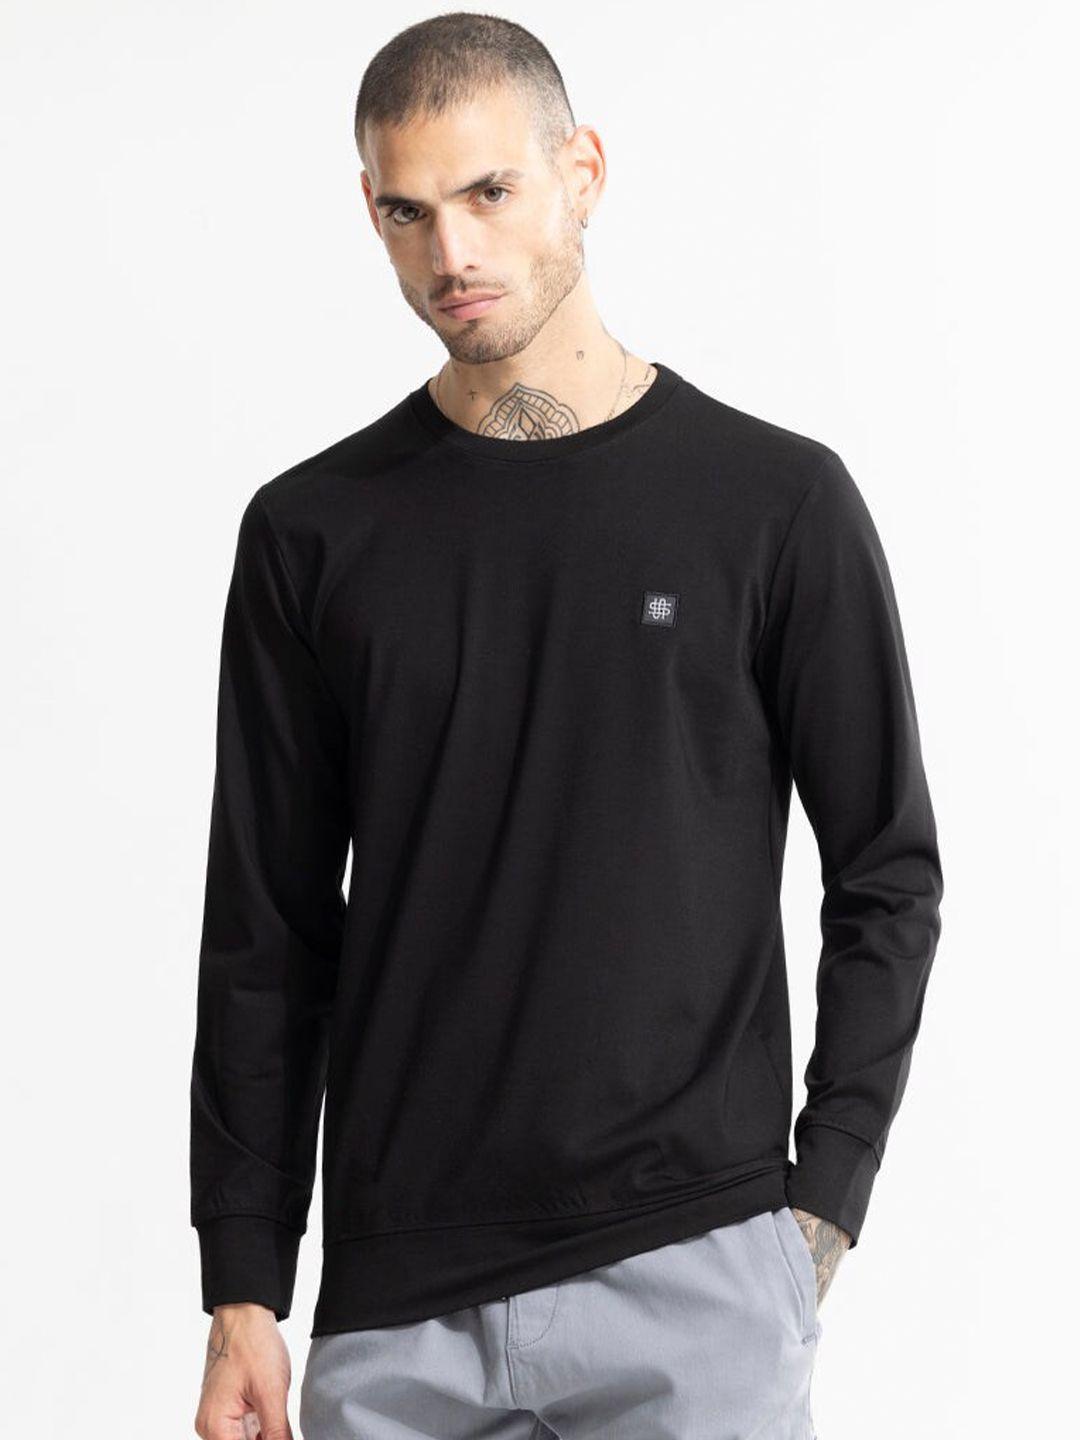 snitch black round neck long sleeves pullover